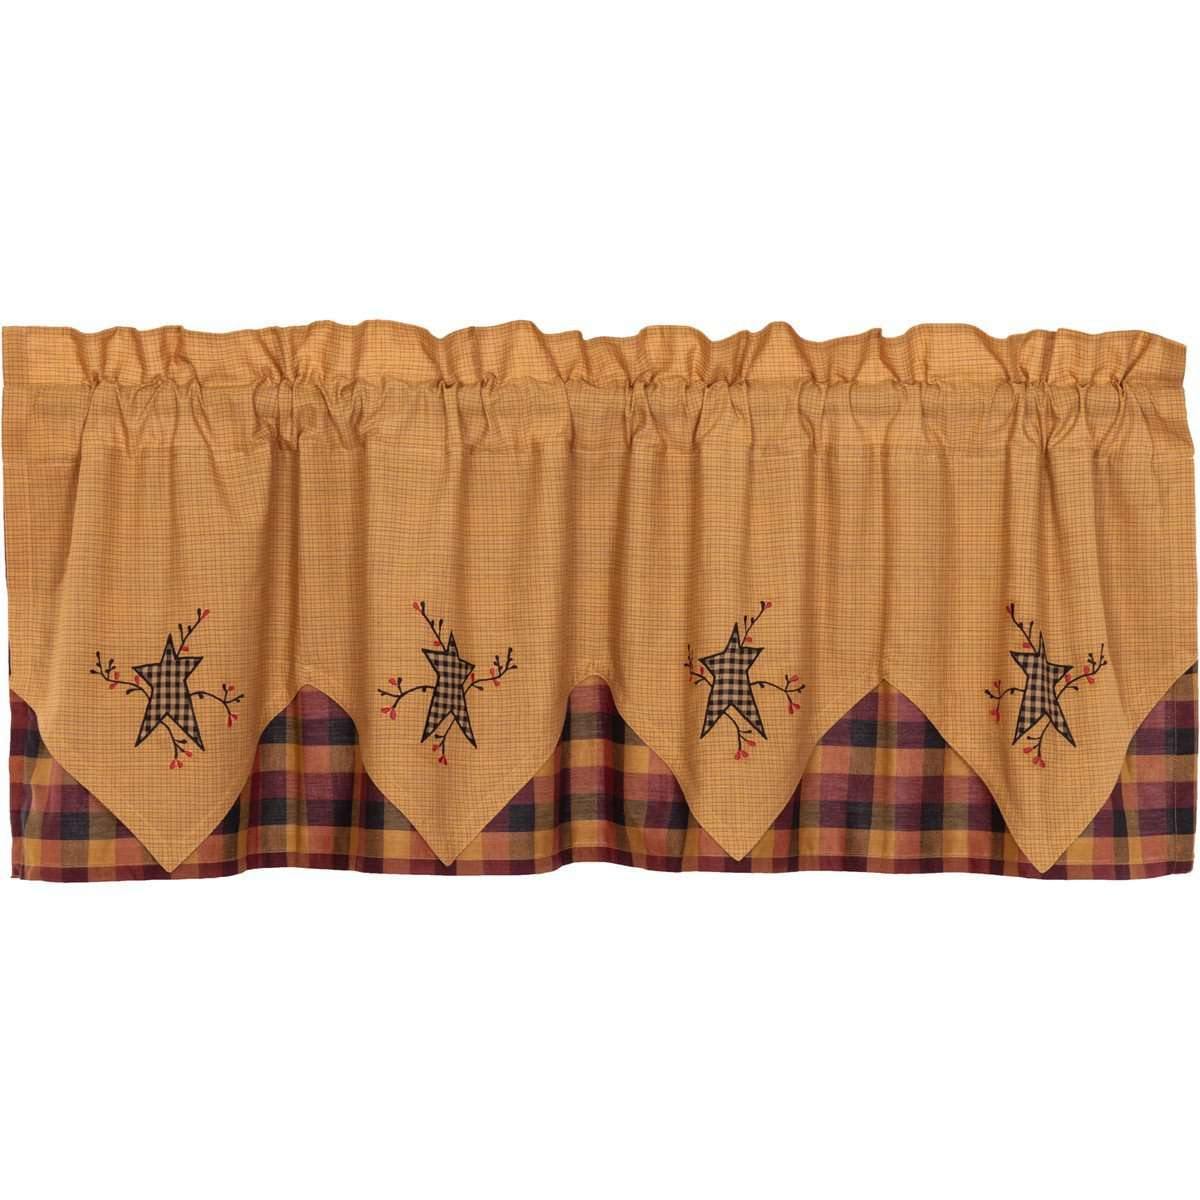 Heritage Farms Primitive Star and Pip Valance Layered Curtain 20x60 VHC Brands - The Fox Decor